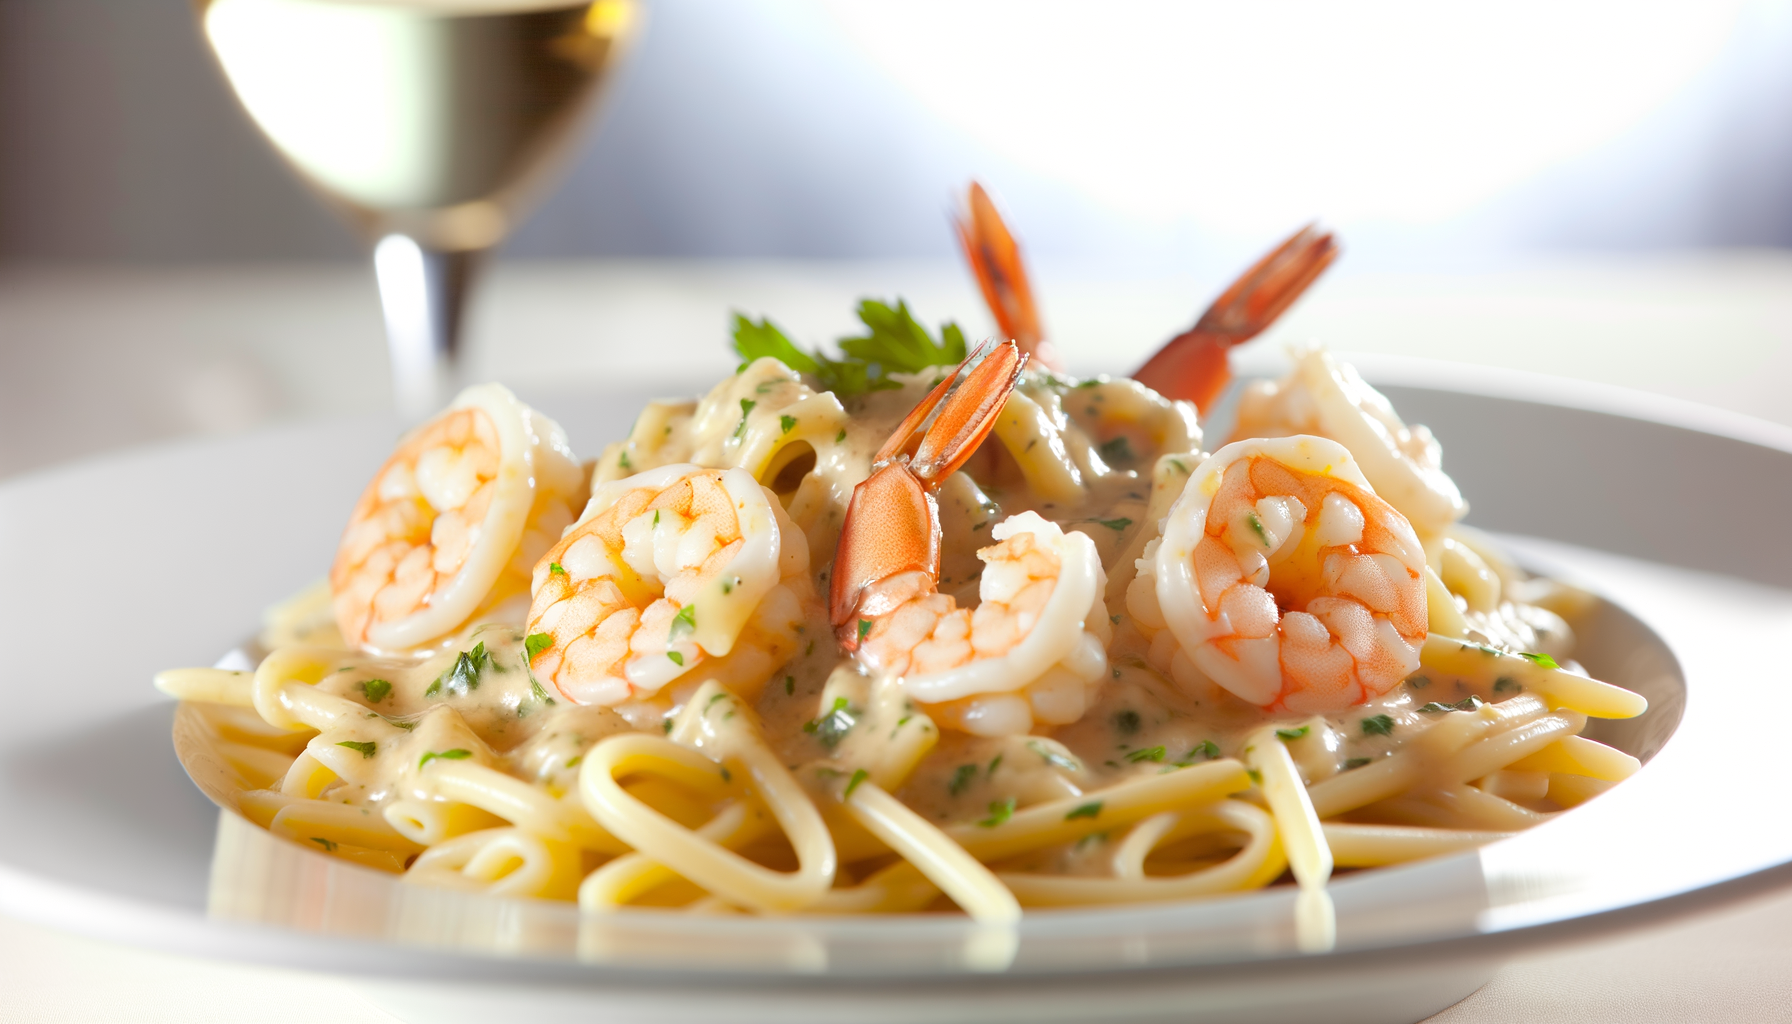 Shrimp scampi served on a bed of linguine, with succulent shrimp drenched in a garlic butter sauce, all highlighted with fresh parsley.